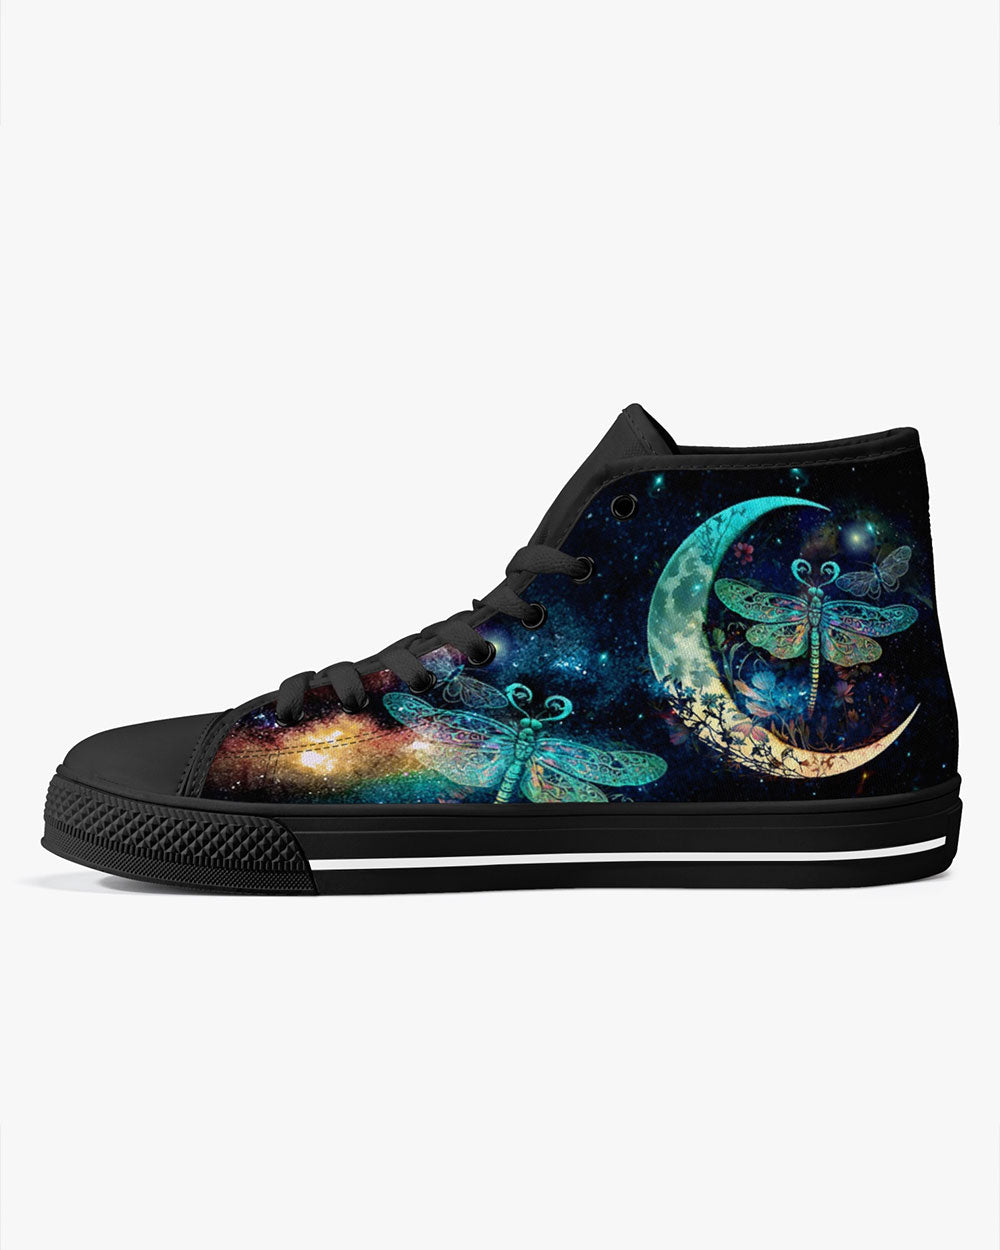 FLY ME TO THE MOON HIGH TOP CANVAS SHOES - TLTW0304238